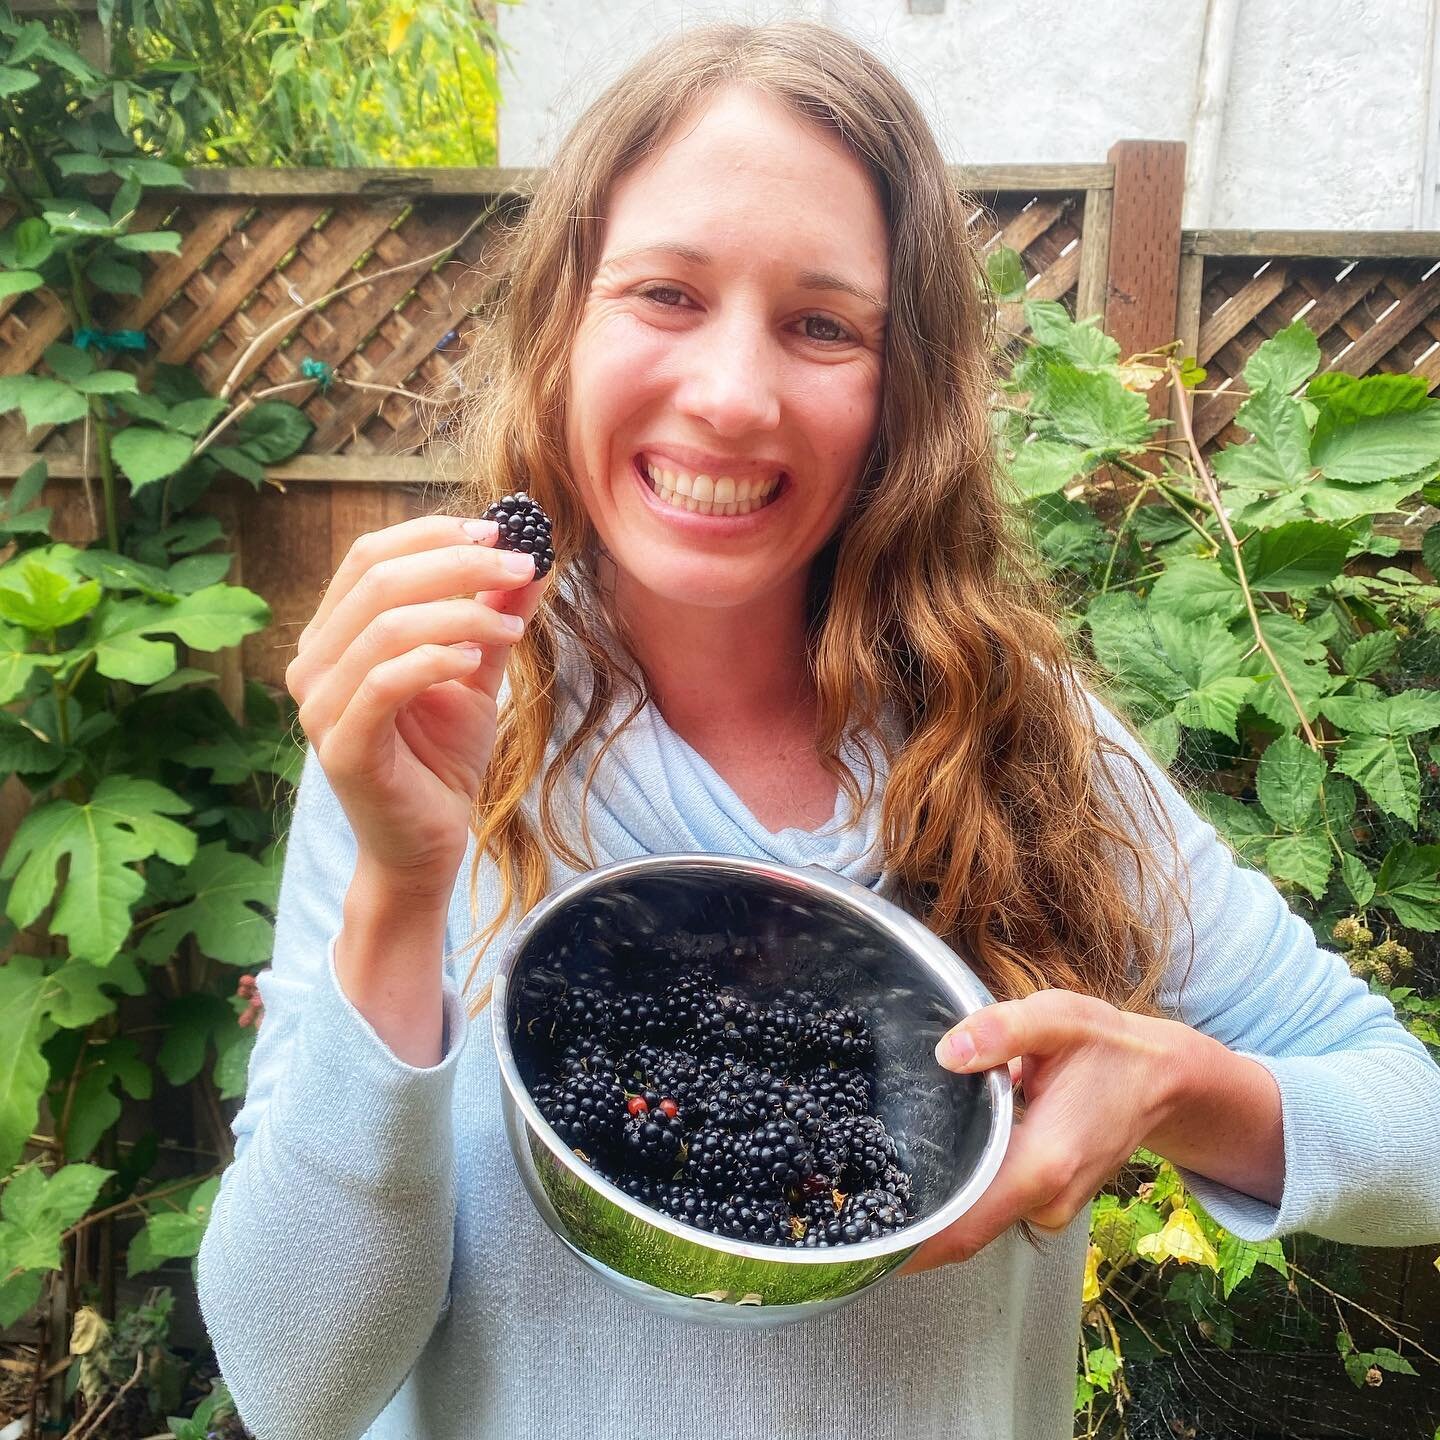 My very first blackberry harvest from our yard! 

Clearly they are Orion-approved&hellip;What, you never seen a &ldquo;black(berry) eye&rdquo; before?!?

#gardening #blackberries #blackberry #babyeating #local